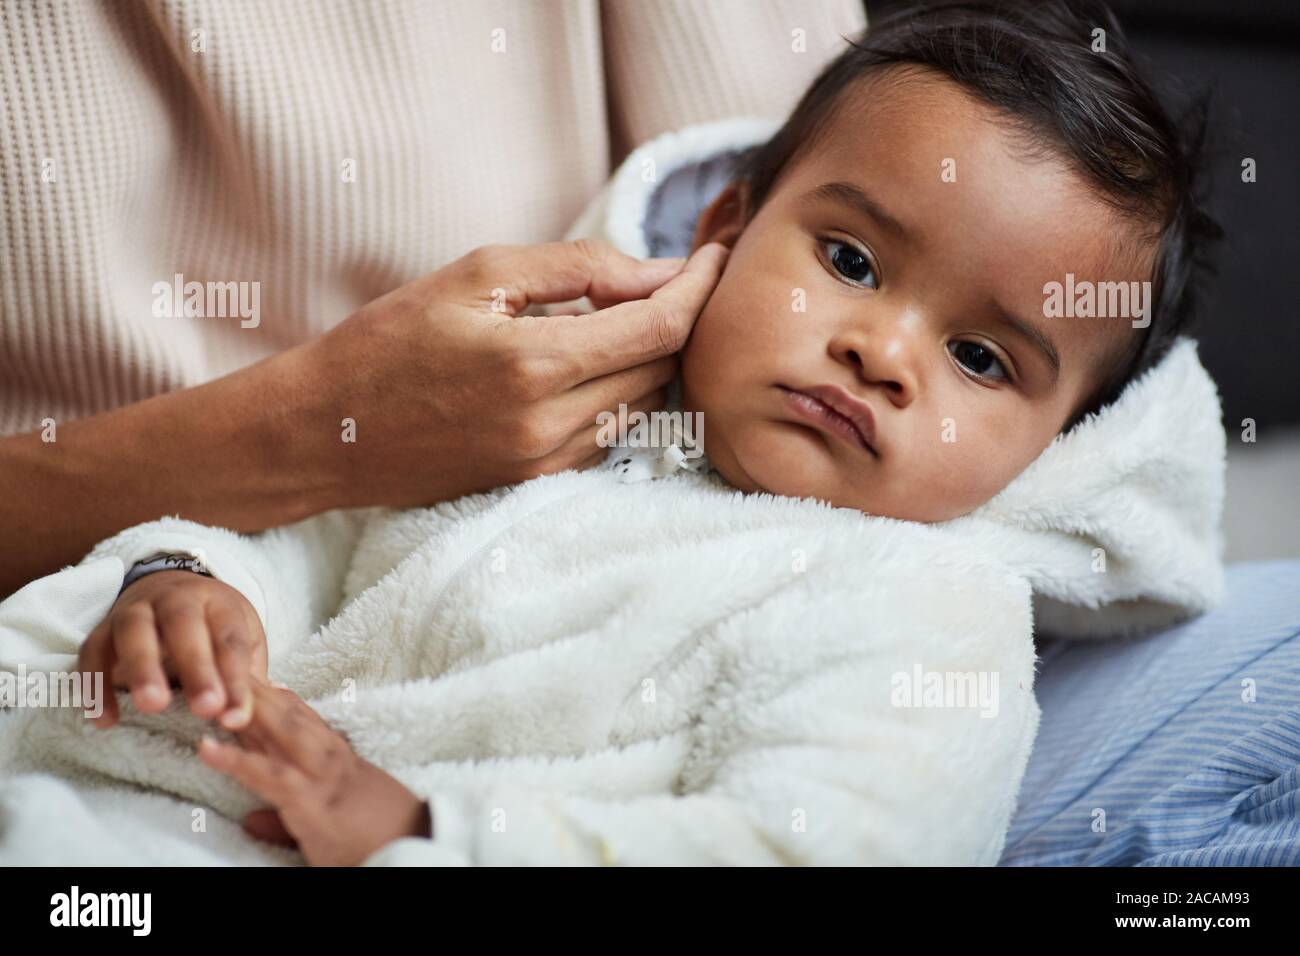 Close-up of cute baby boy lying on his mother's hands while she stroking his head and cradling him Stock Photo